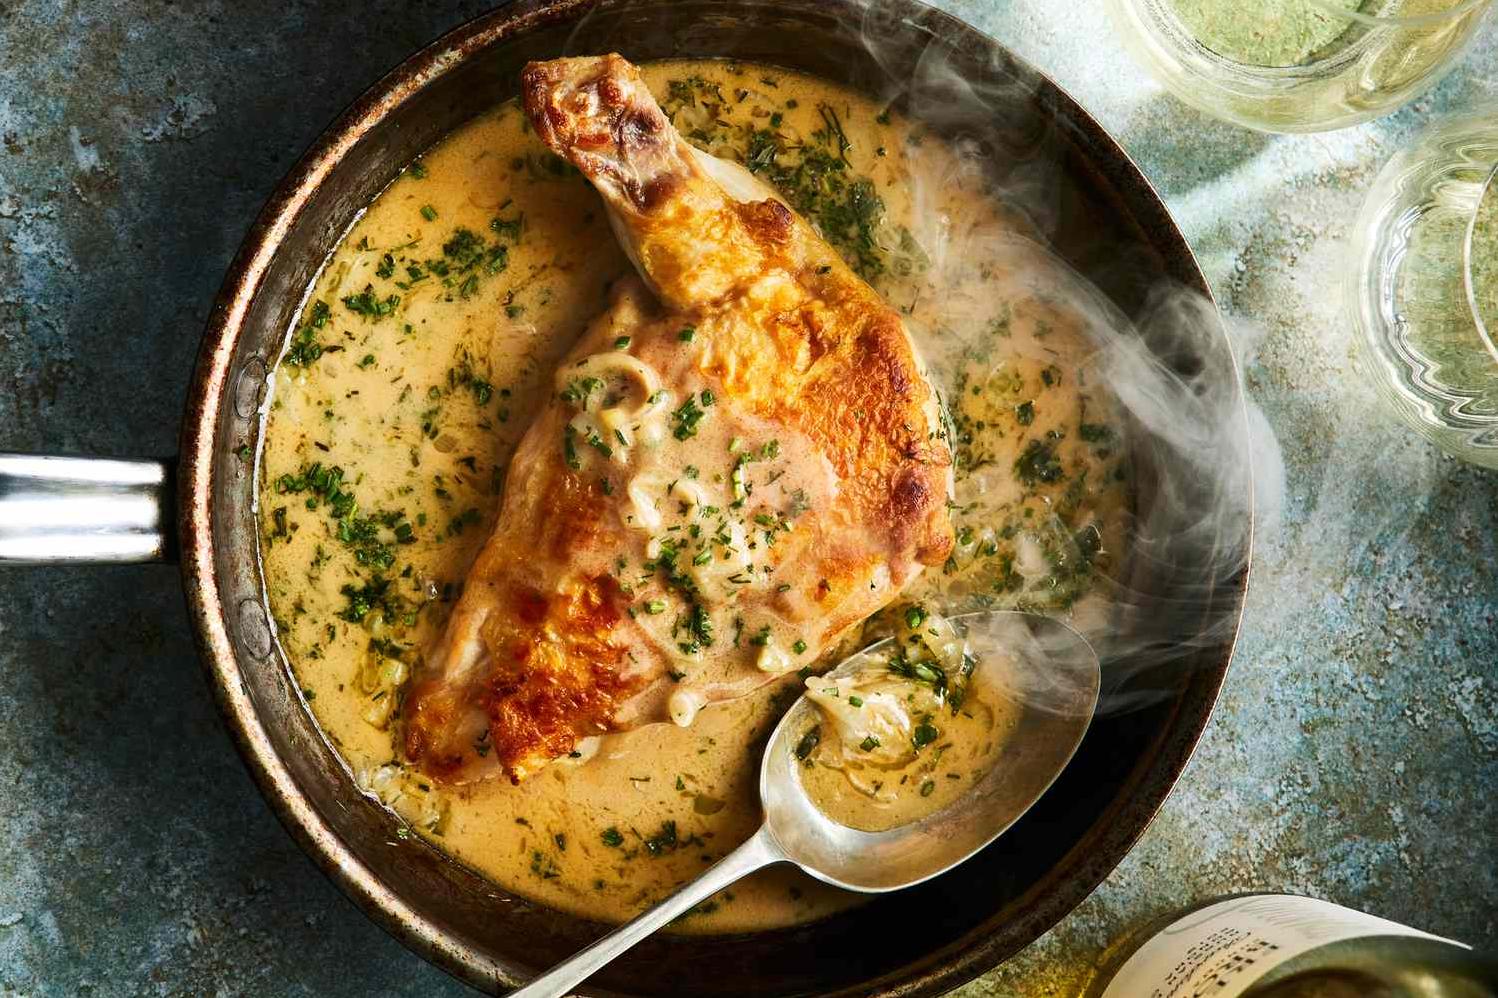  A match made in heaven: chicken, white wine, and fresh herbs